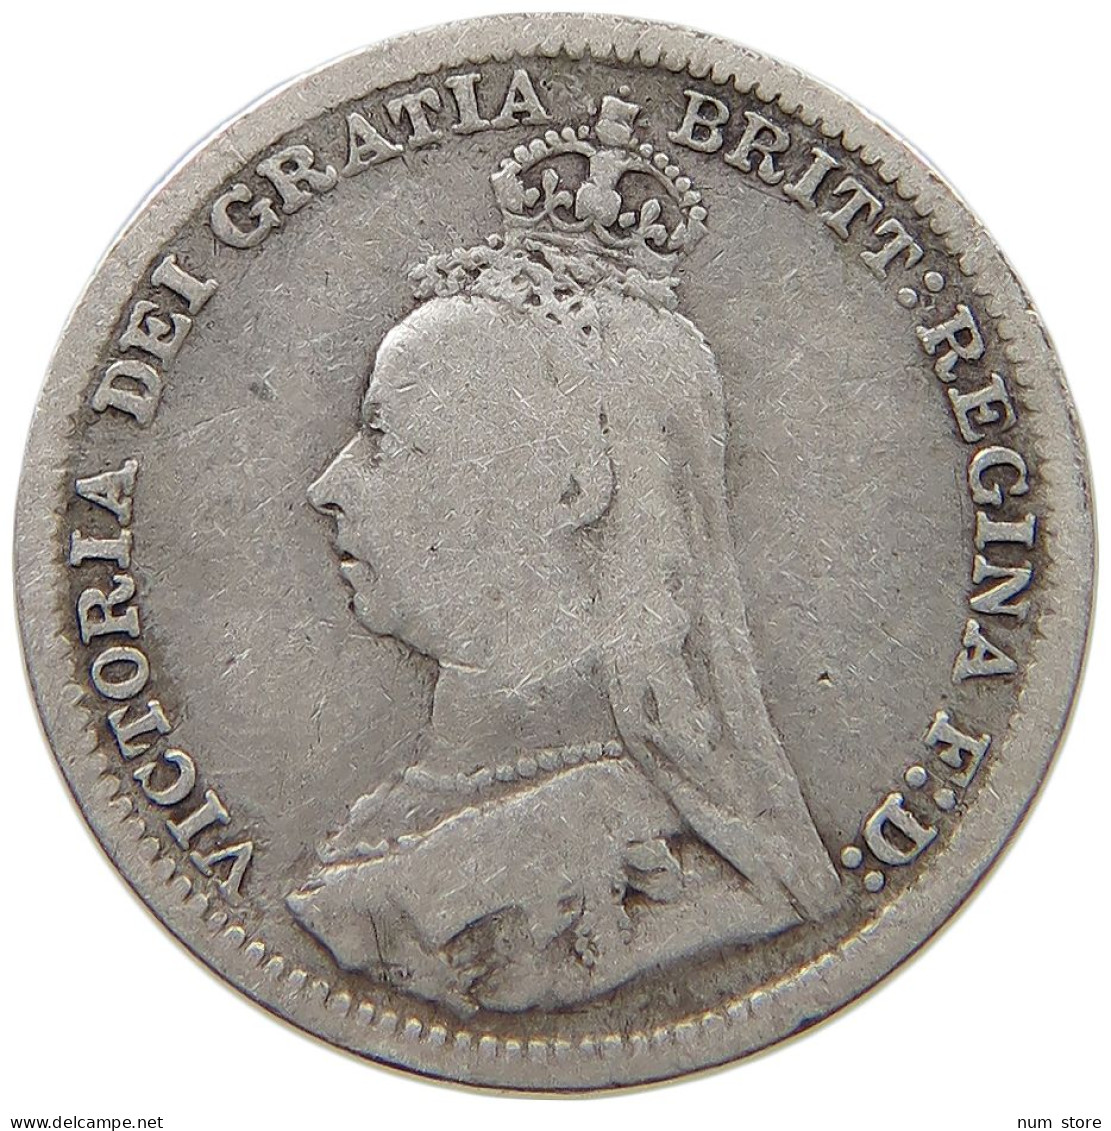 GREAT BRITAIN THREEPENCE 1892 #s059 0567 - F. 3 Pence